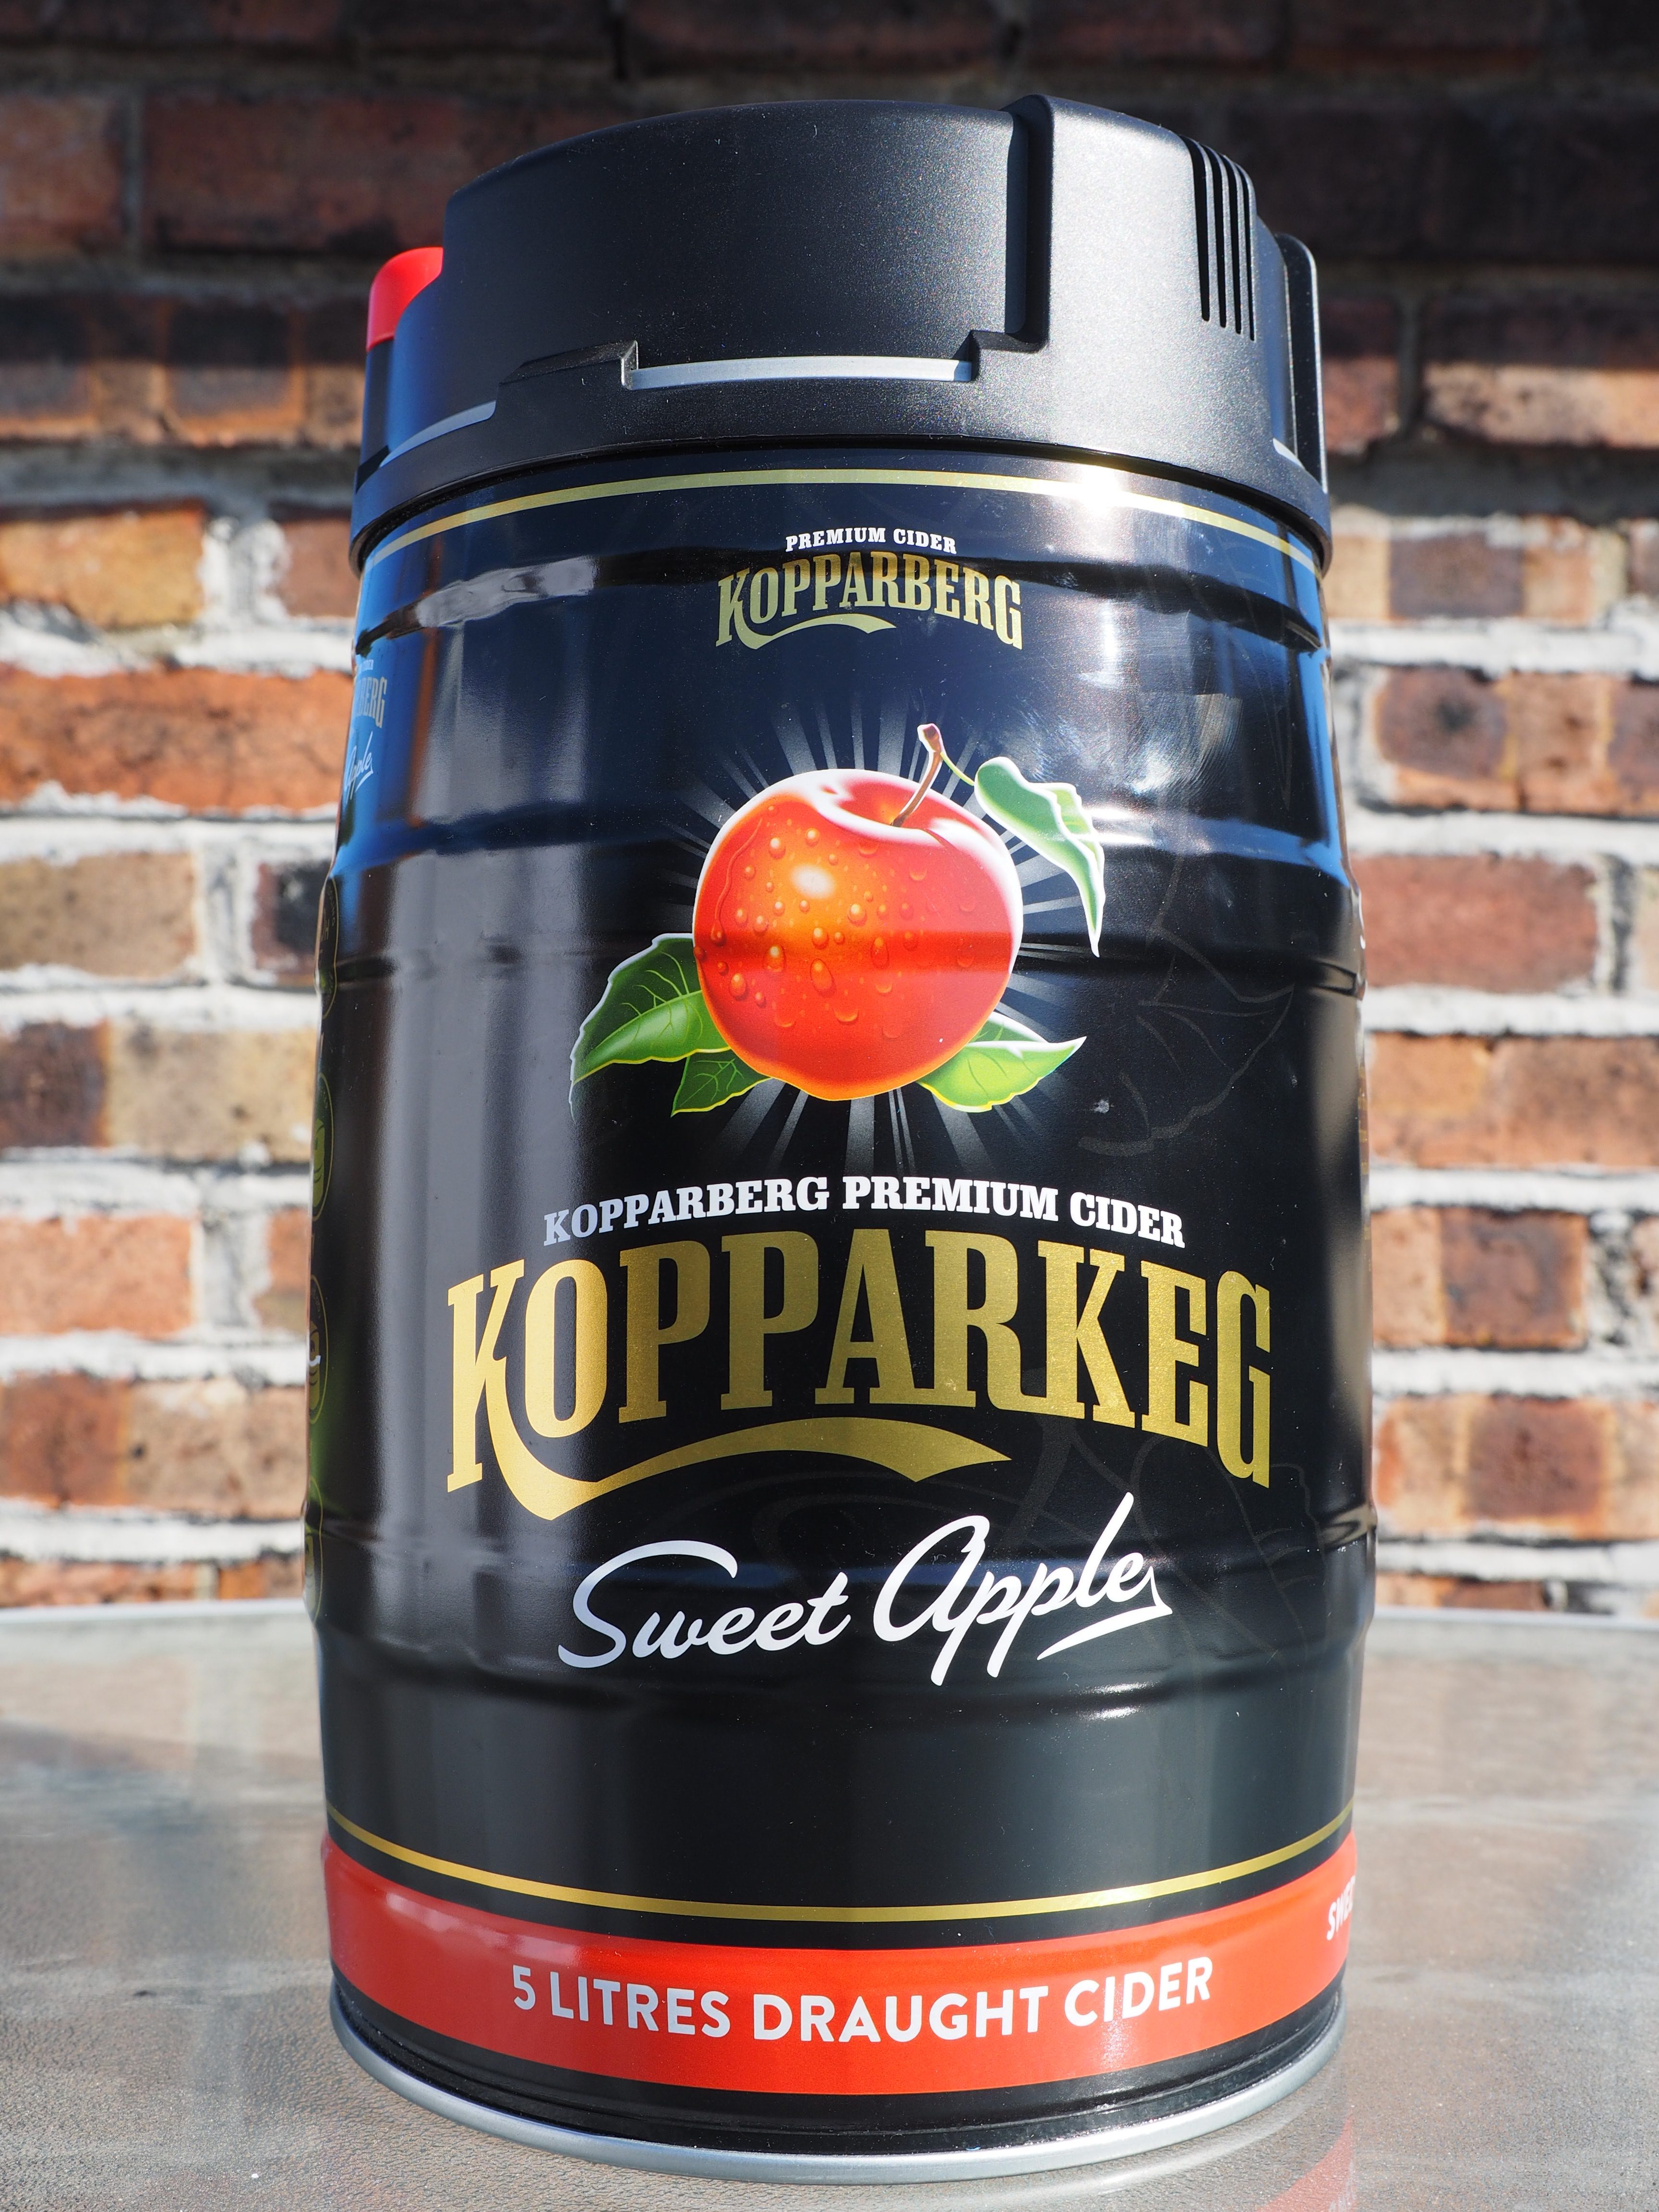 Summer lines up well with Kopparberg’s KopparKeg